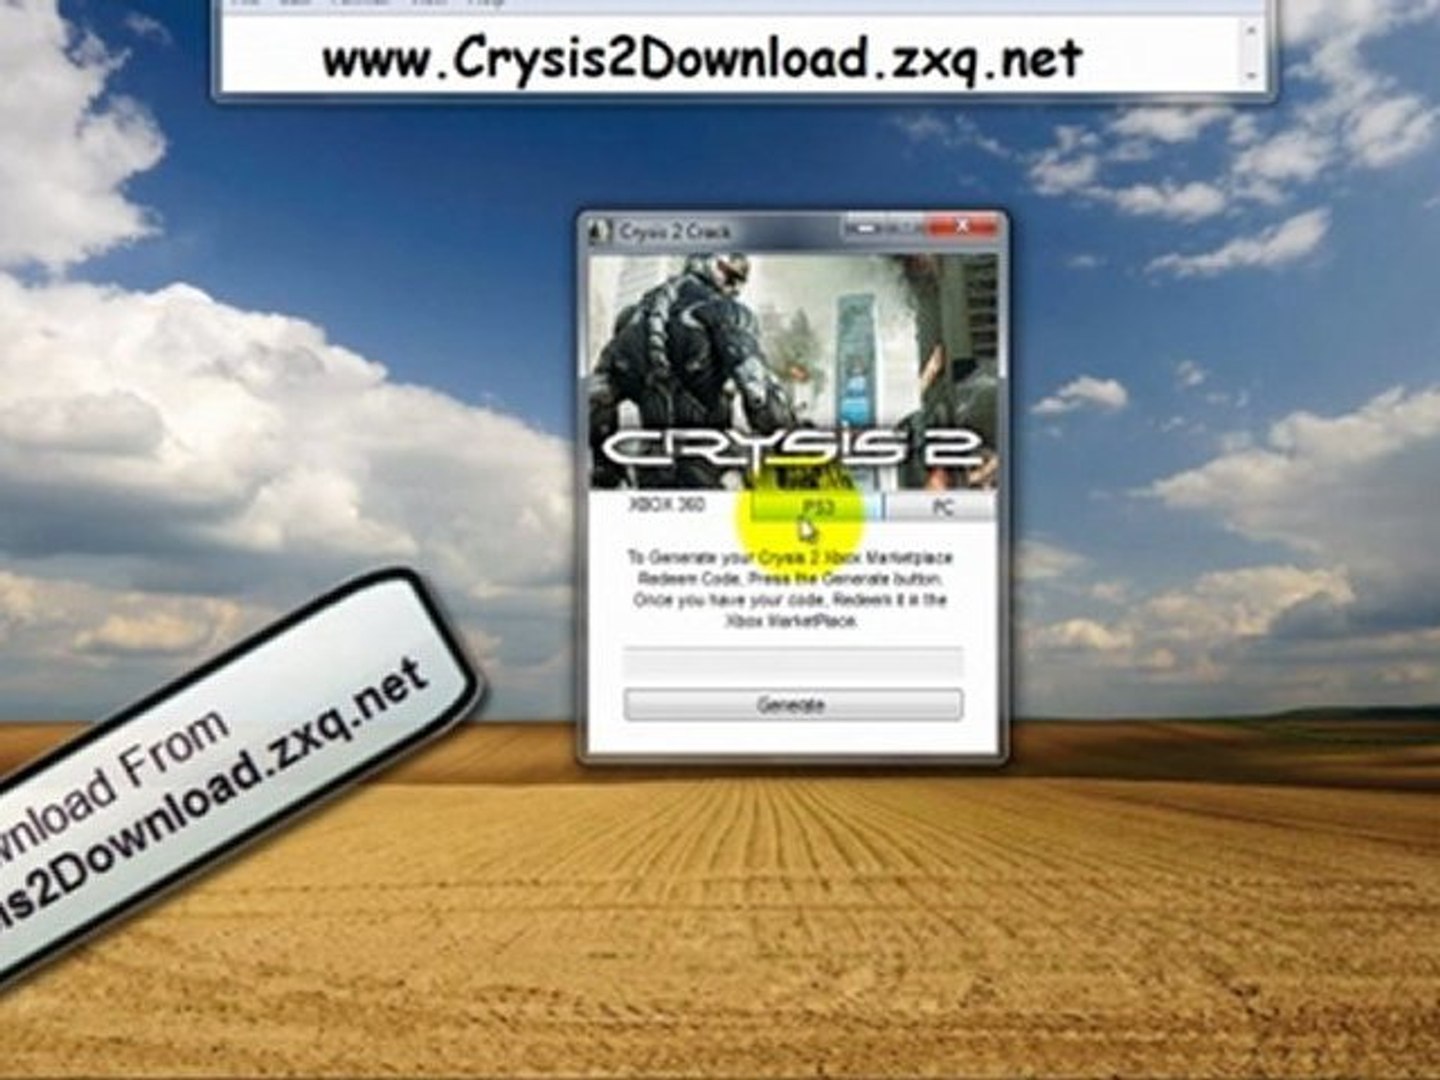 How to Download Crysis 2 Codes for Xbox 360, PS3 and PC - video Dailymotion